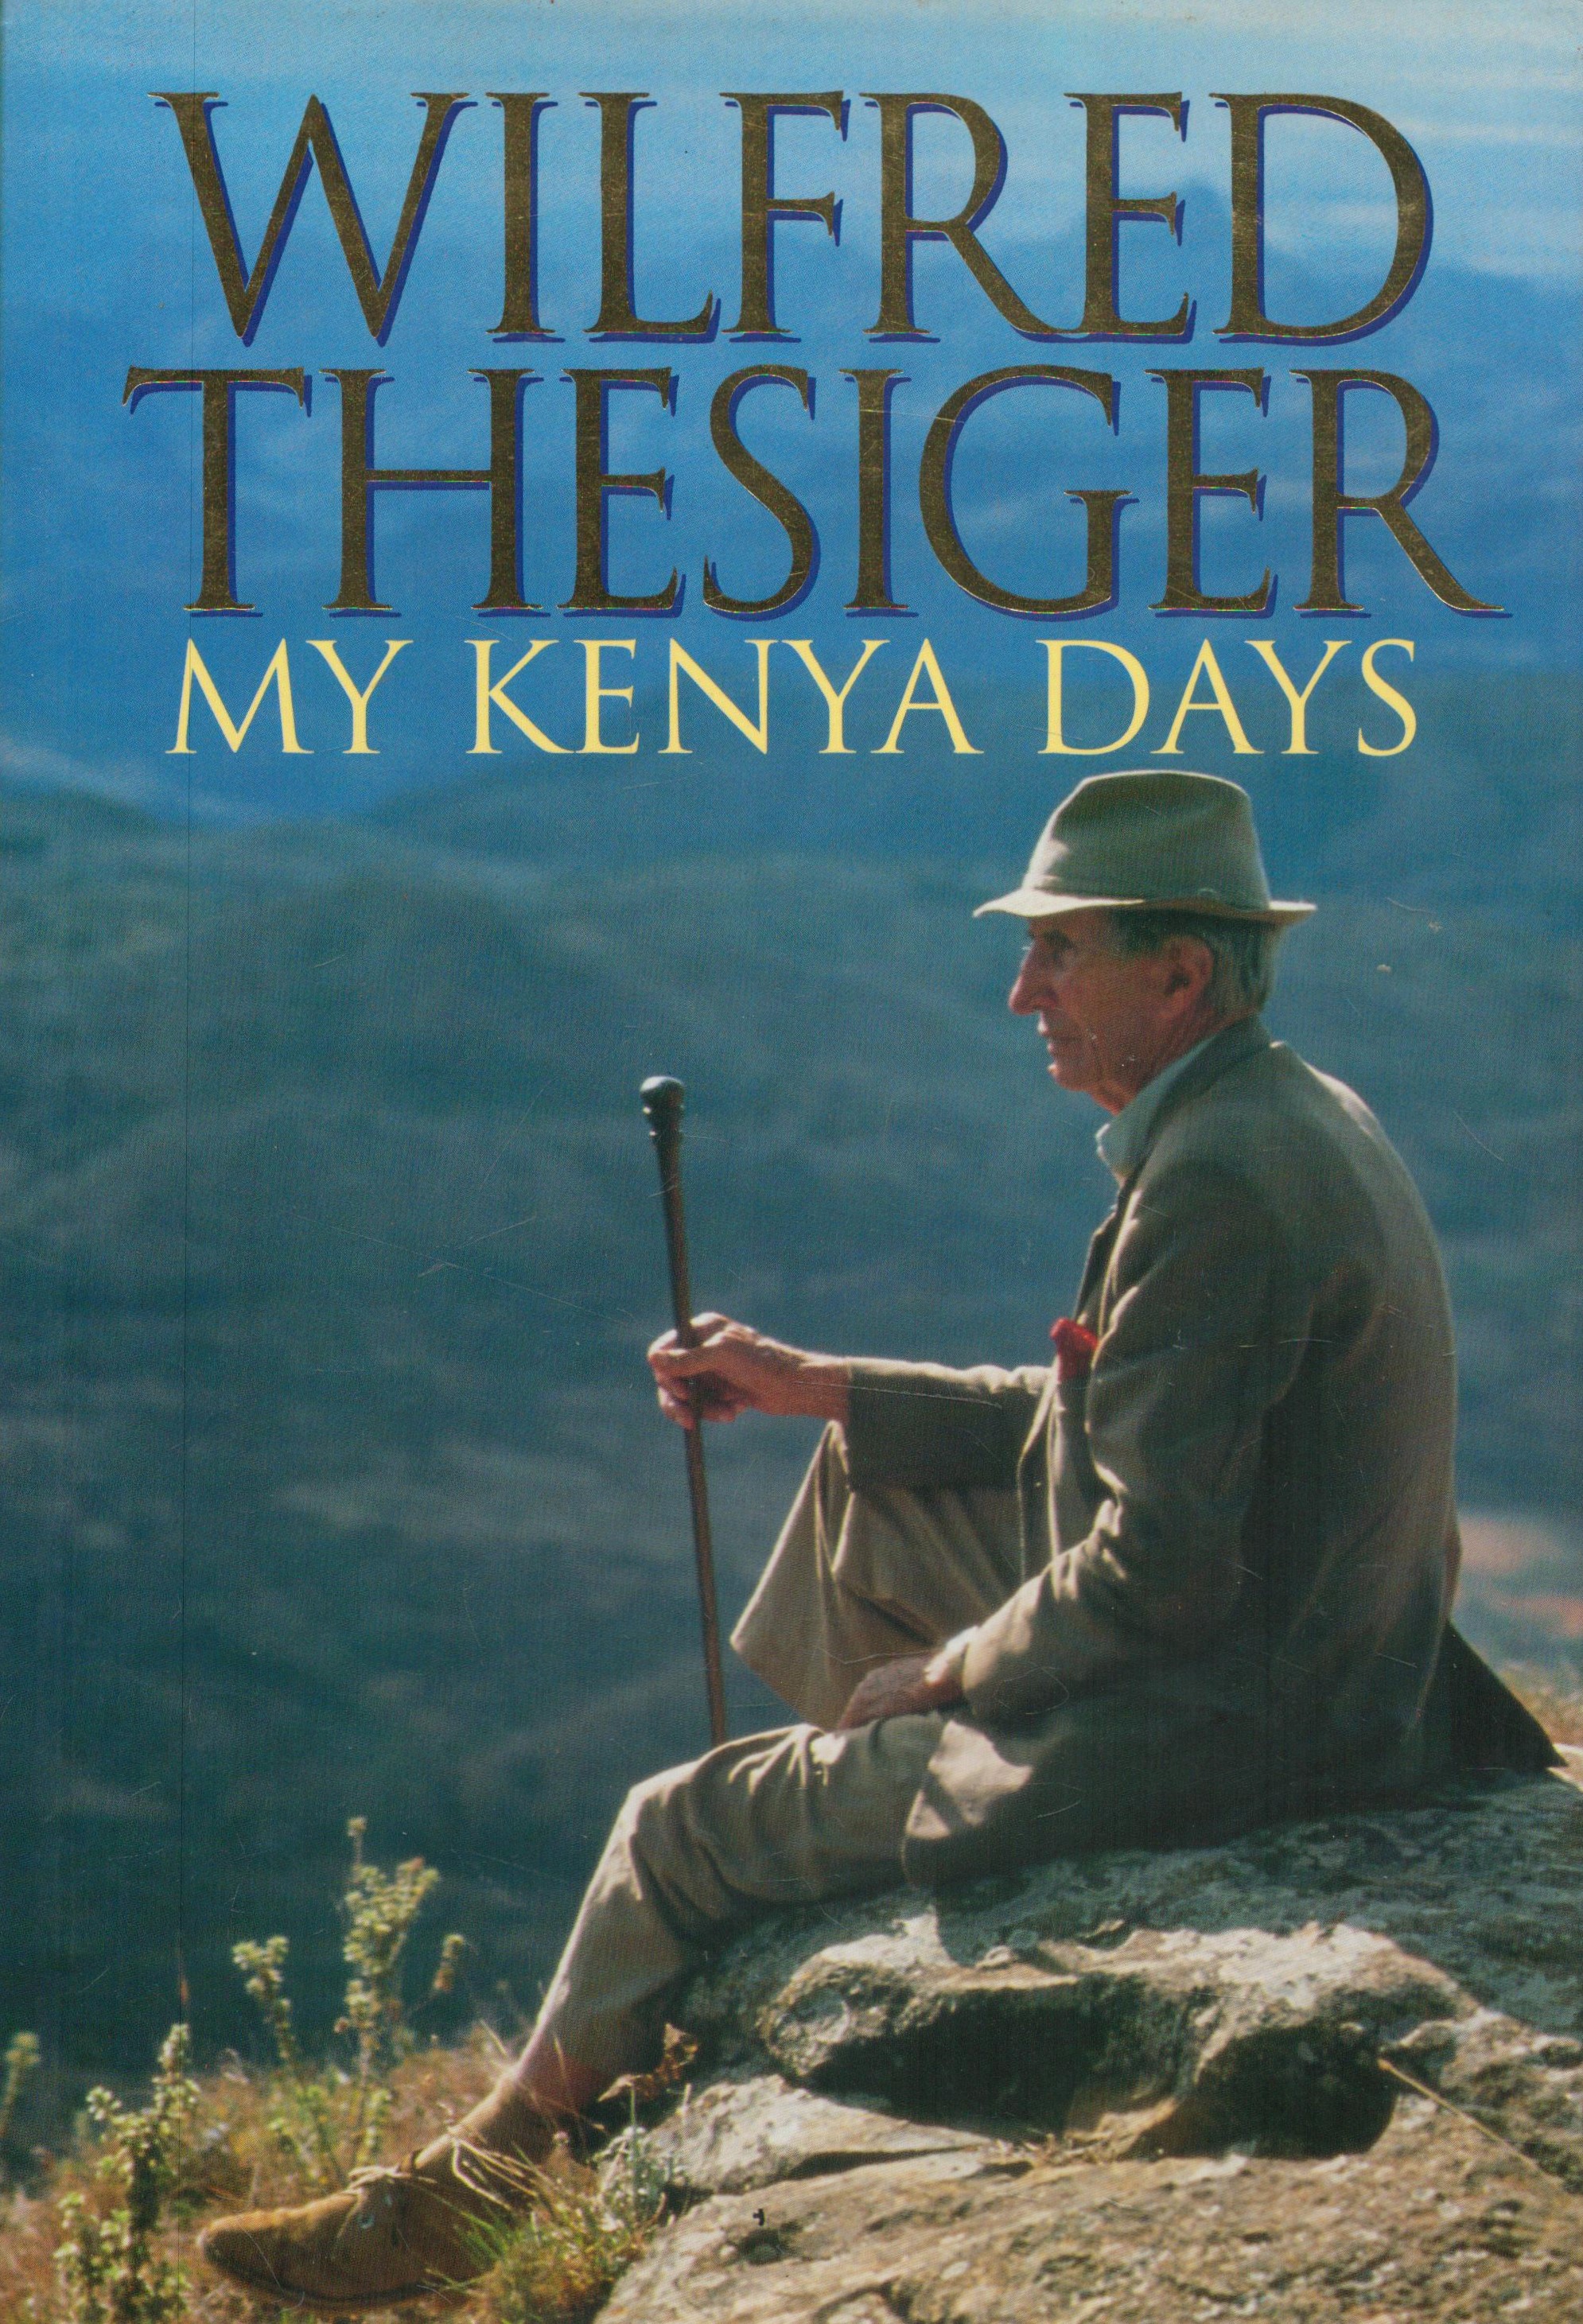 Wilfred Thesiger My Kenya Days. Published by Harper Collins. 1994. Illustrated with many full-page